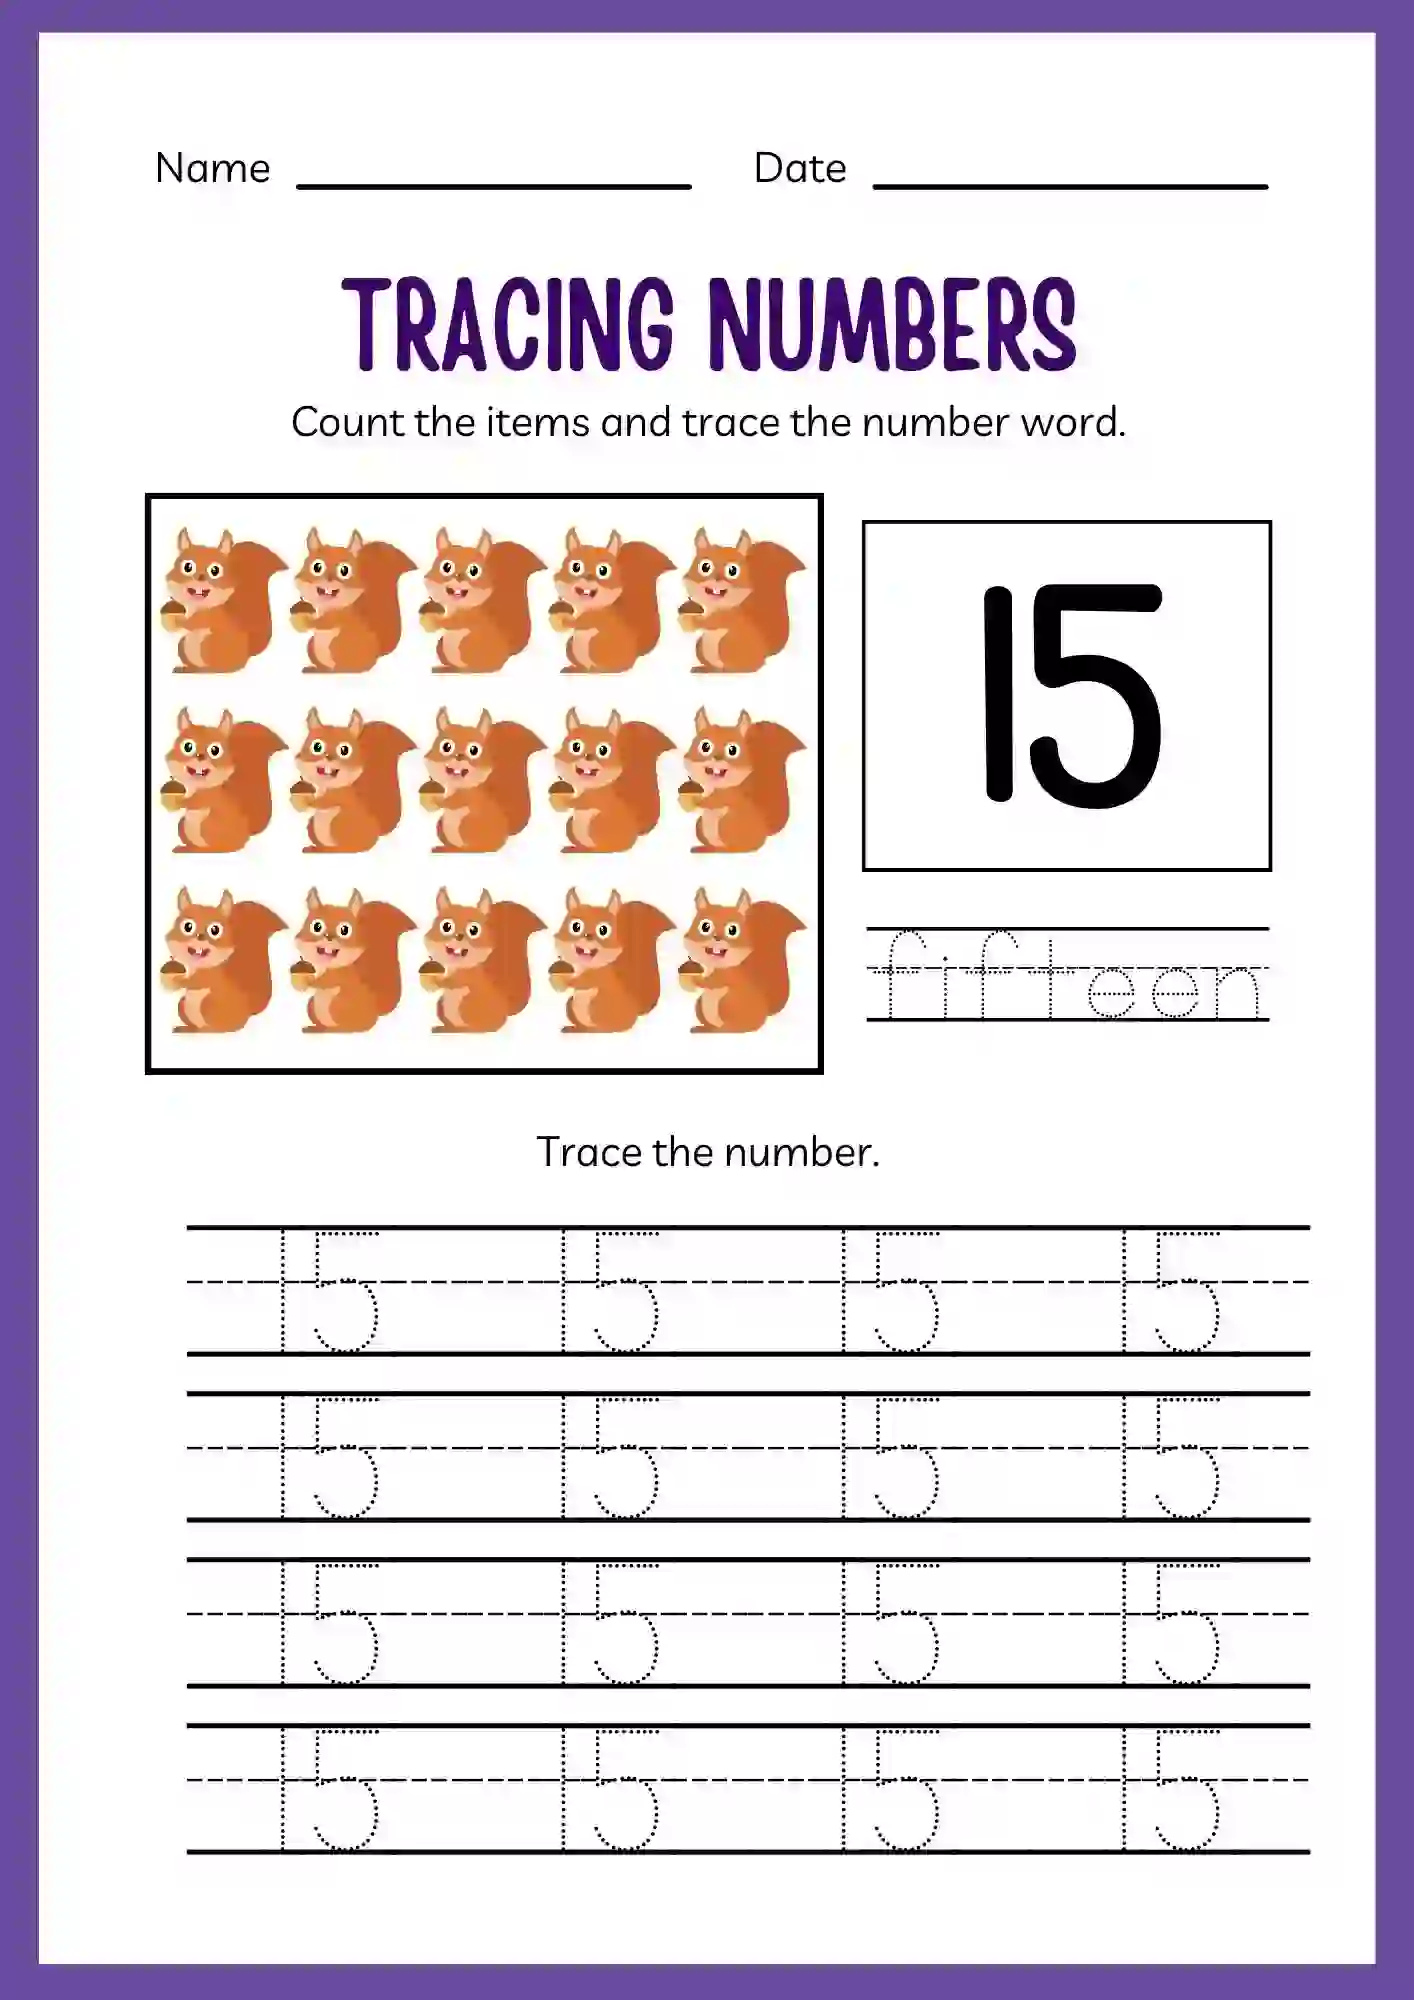 Number Tracing Worksheets 1 to 20 (Number 15 tracing sheet)